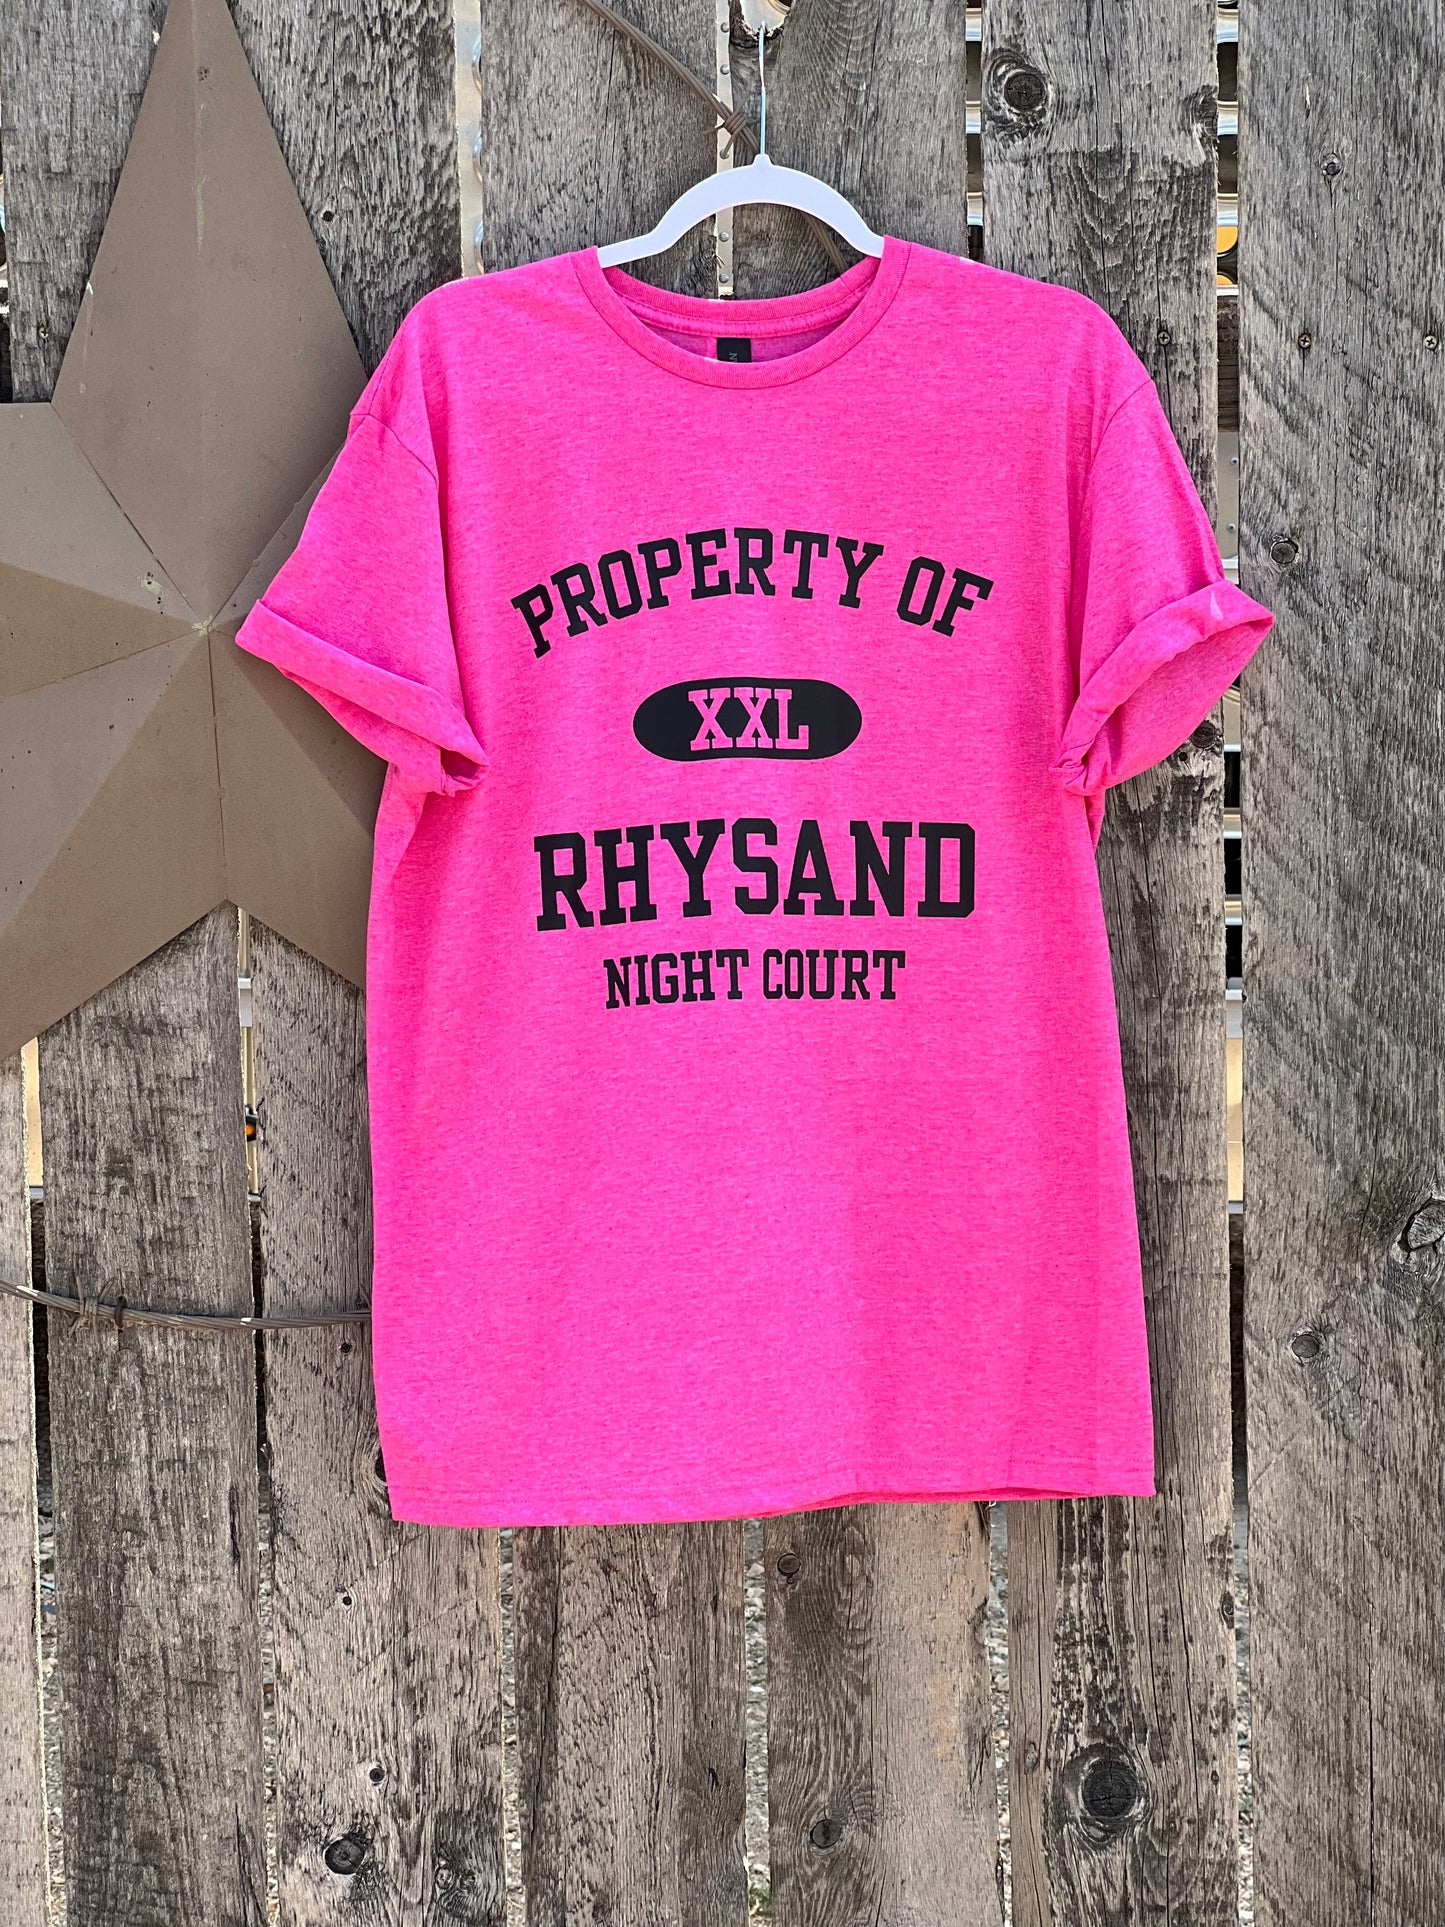 Property Of Rhysand